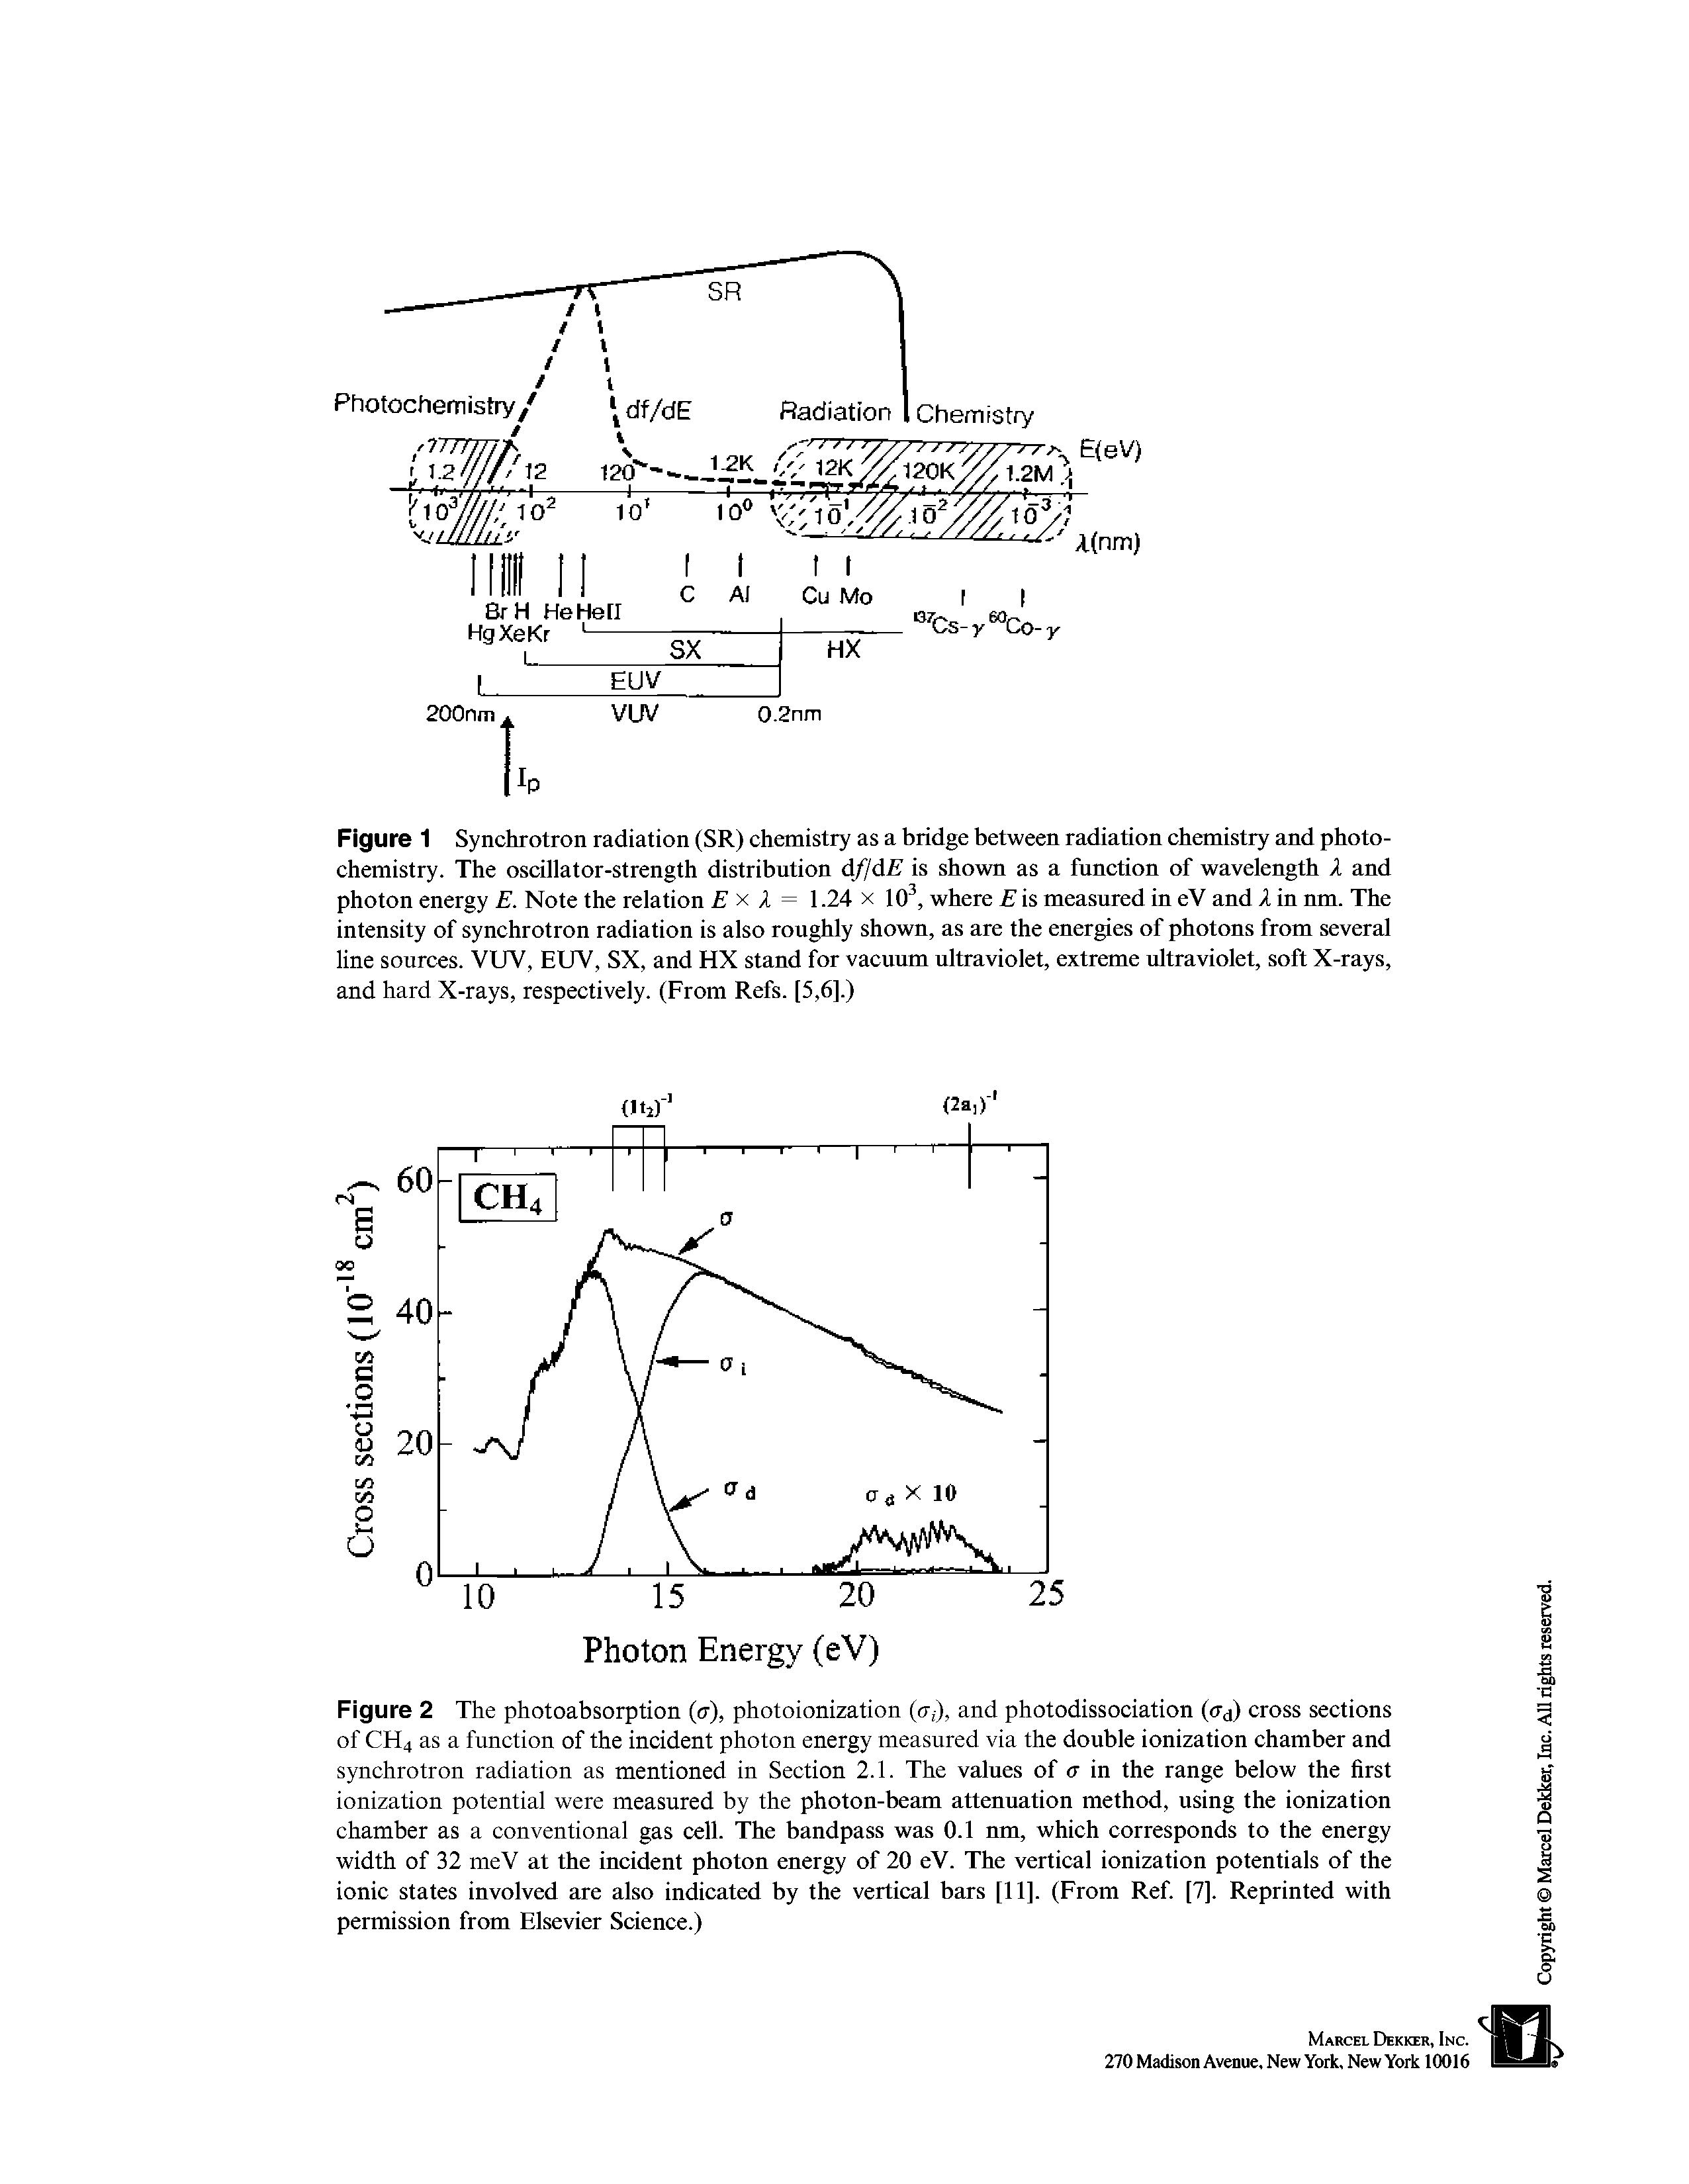 Figure 2 The photoabsorption (c), photoionization (o-,-), and photodissociation (cr<j) cross sections of CH4 as a function of the incident photon energy measured via the double ionization chamber and synchrotron radiation as mentioned in Section 2.1. The values of cr in the range below the first ionization potential were measured by the photon-beam attenuation method, using the ionization chamber as a conventional gas cell. The bandpass was 0.1 nm, which corresponds to the energy width of 32 meV at the incident photon energy of 20 eV. The vertical ionization potentials of the ionic states involved are also indicated by the vertical bars [11]. (From Ref [7]. Reprinted with permission from Flsevier Science.)...